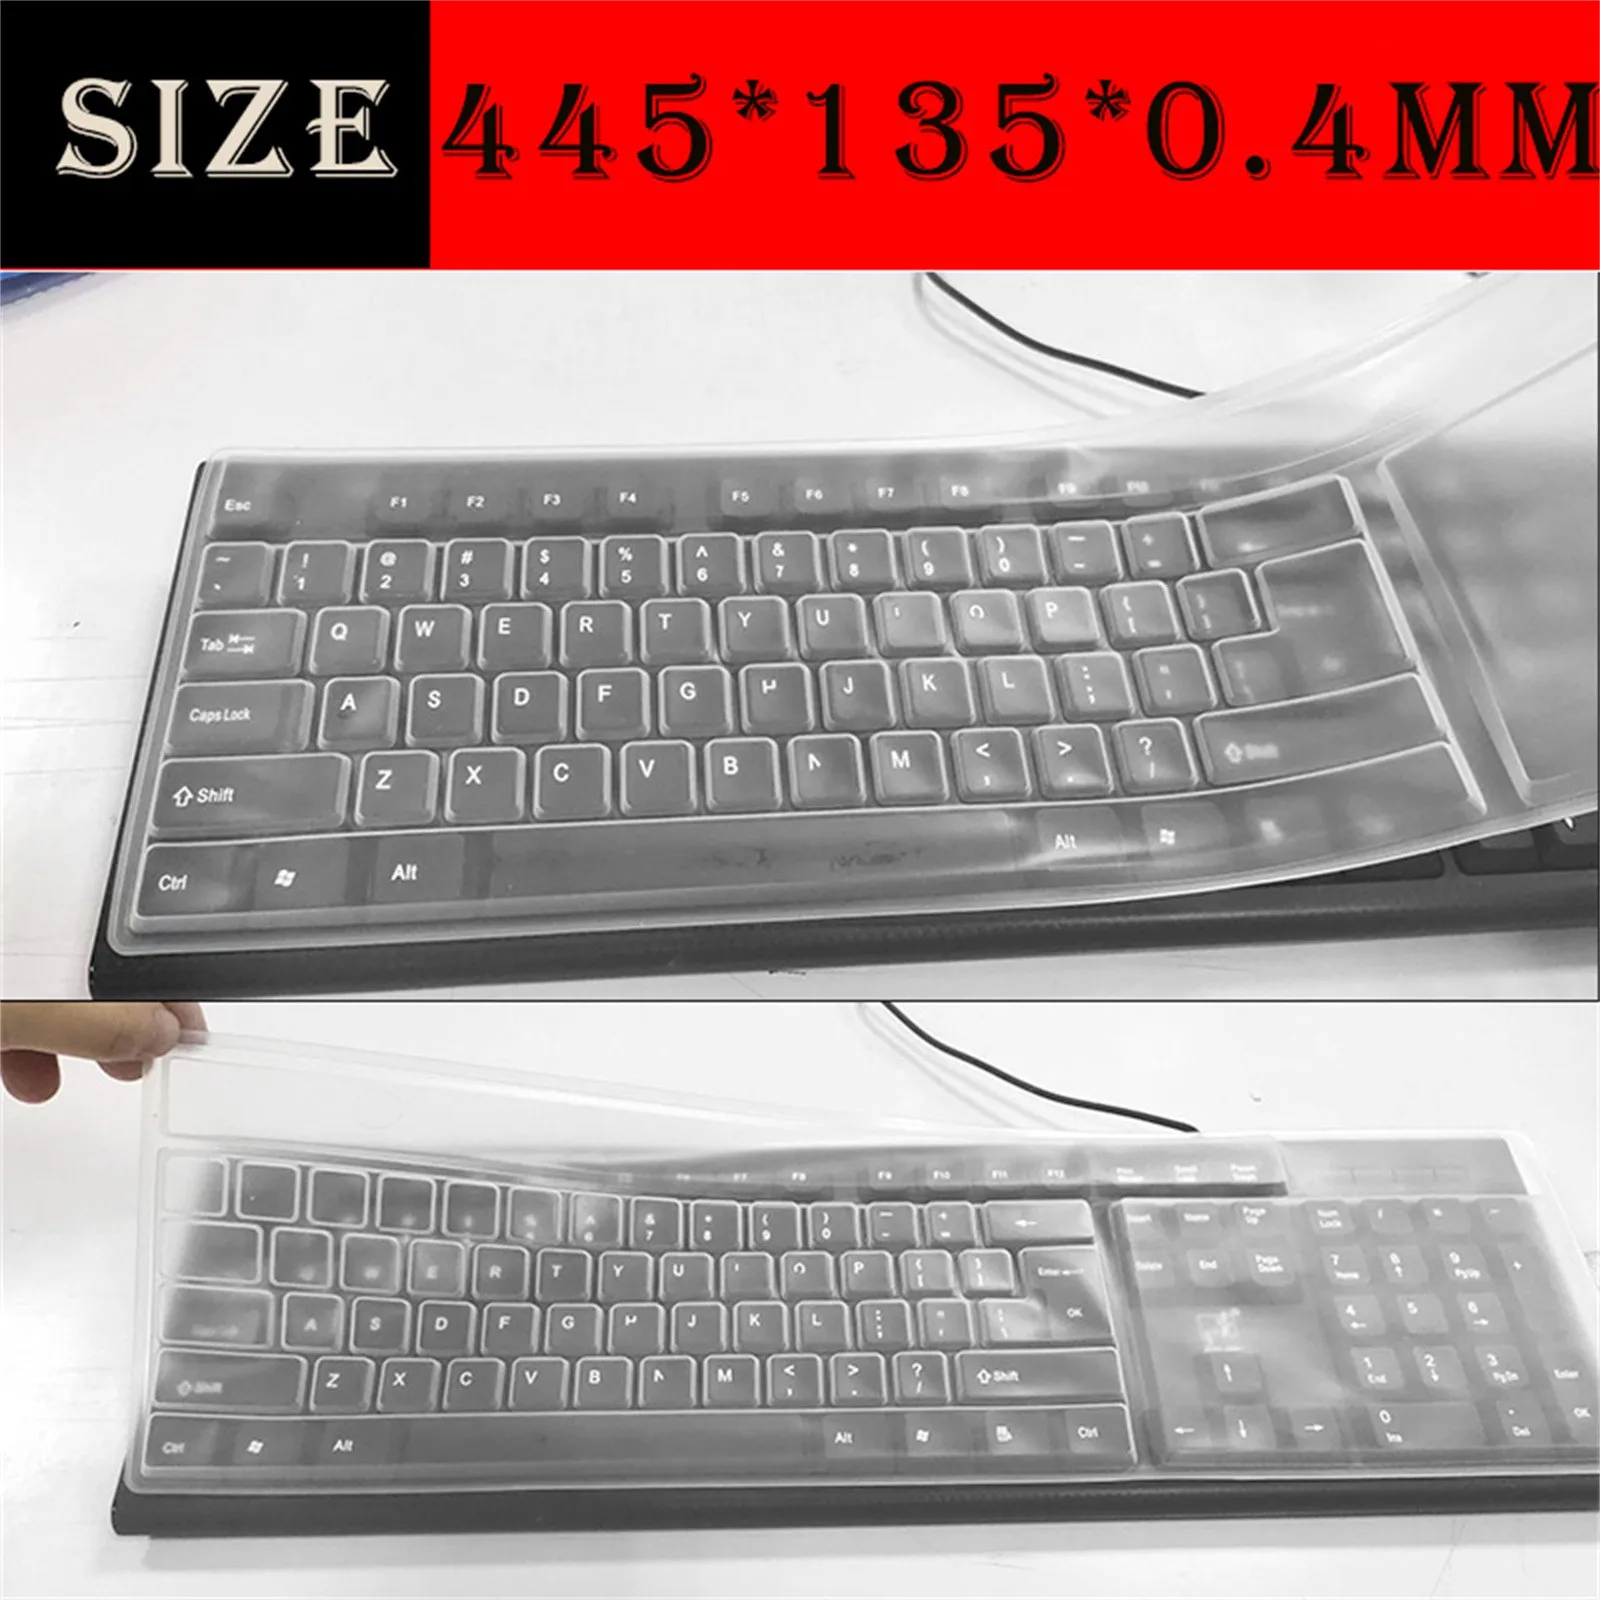 1x Universal Silicone Desktop Computer Keyboard`Cover Skin Protector Film Cover* 